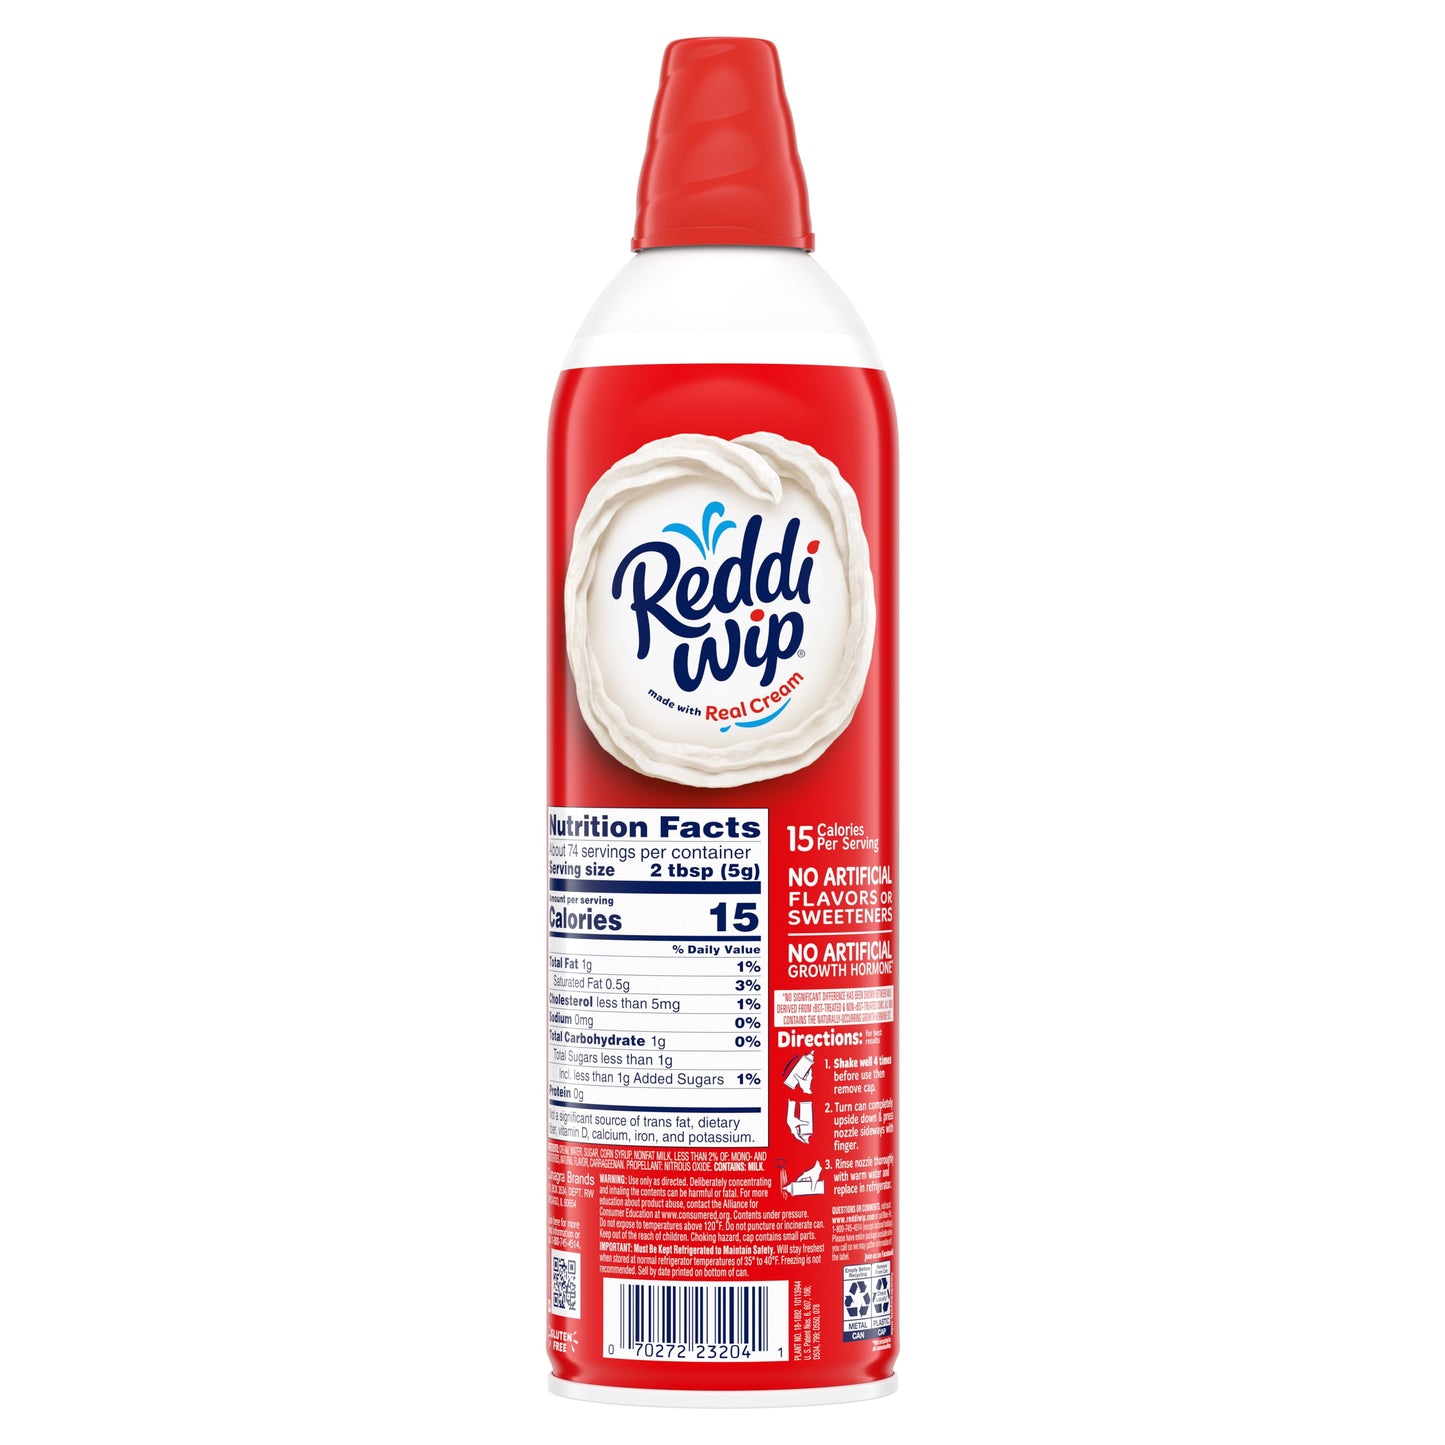 Reddi Wip Original Whipped Topping Made with Real Cream, 13 oz Spray Can